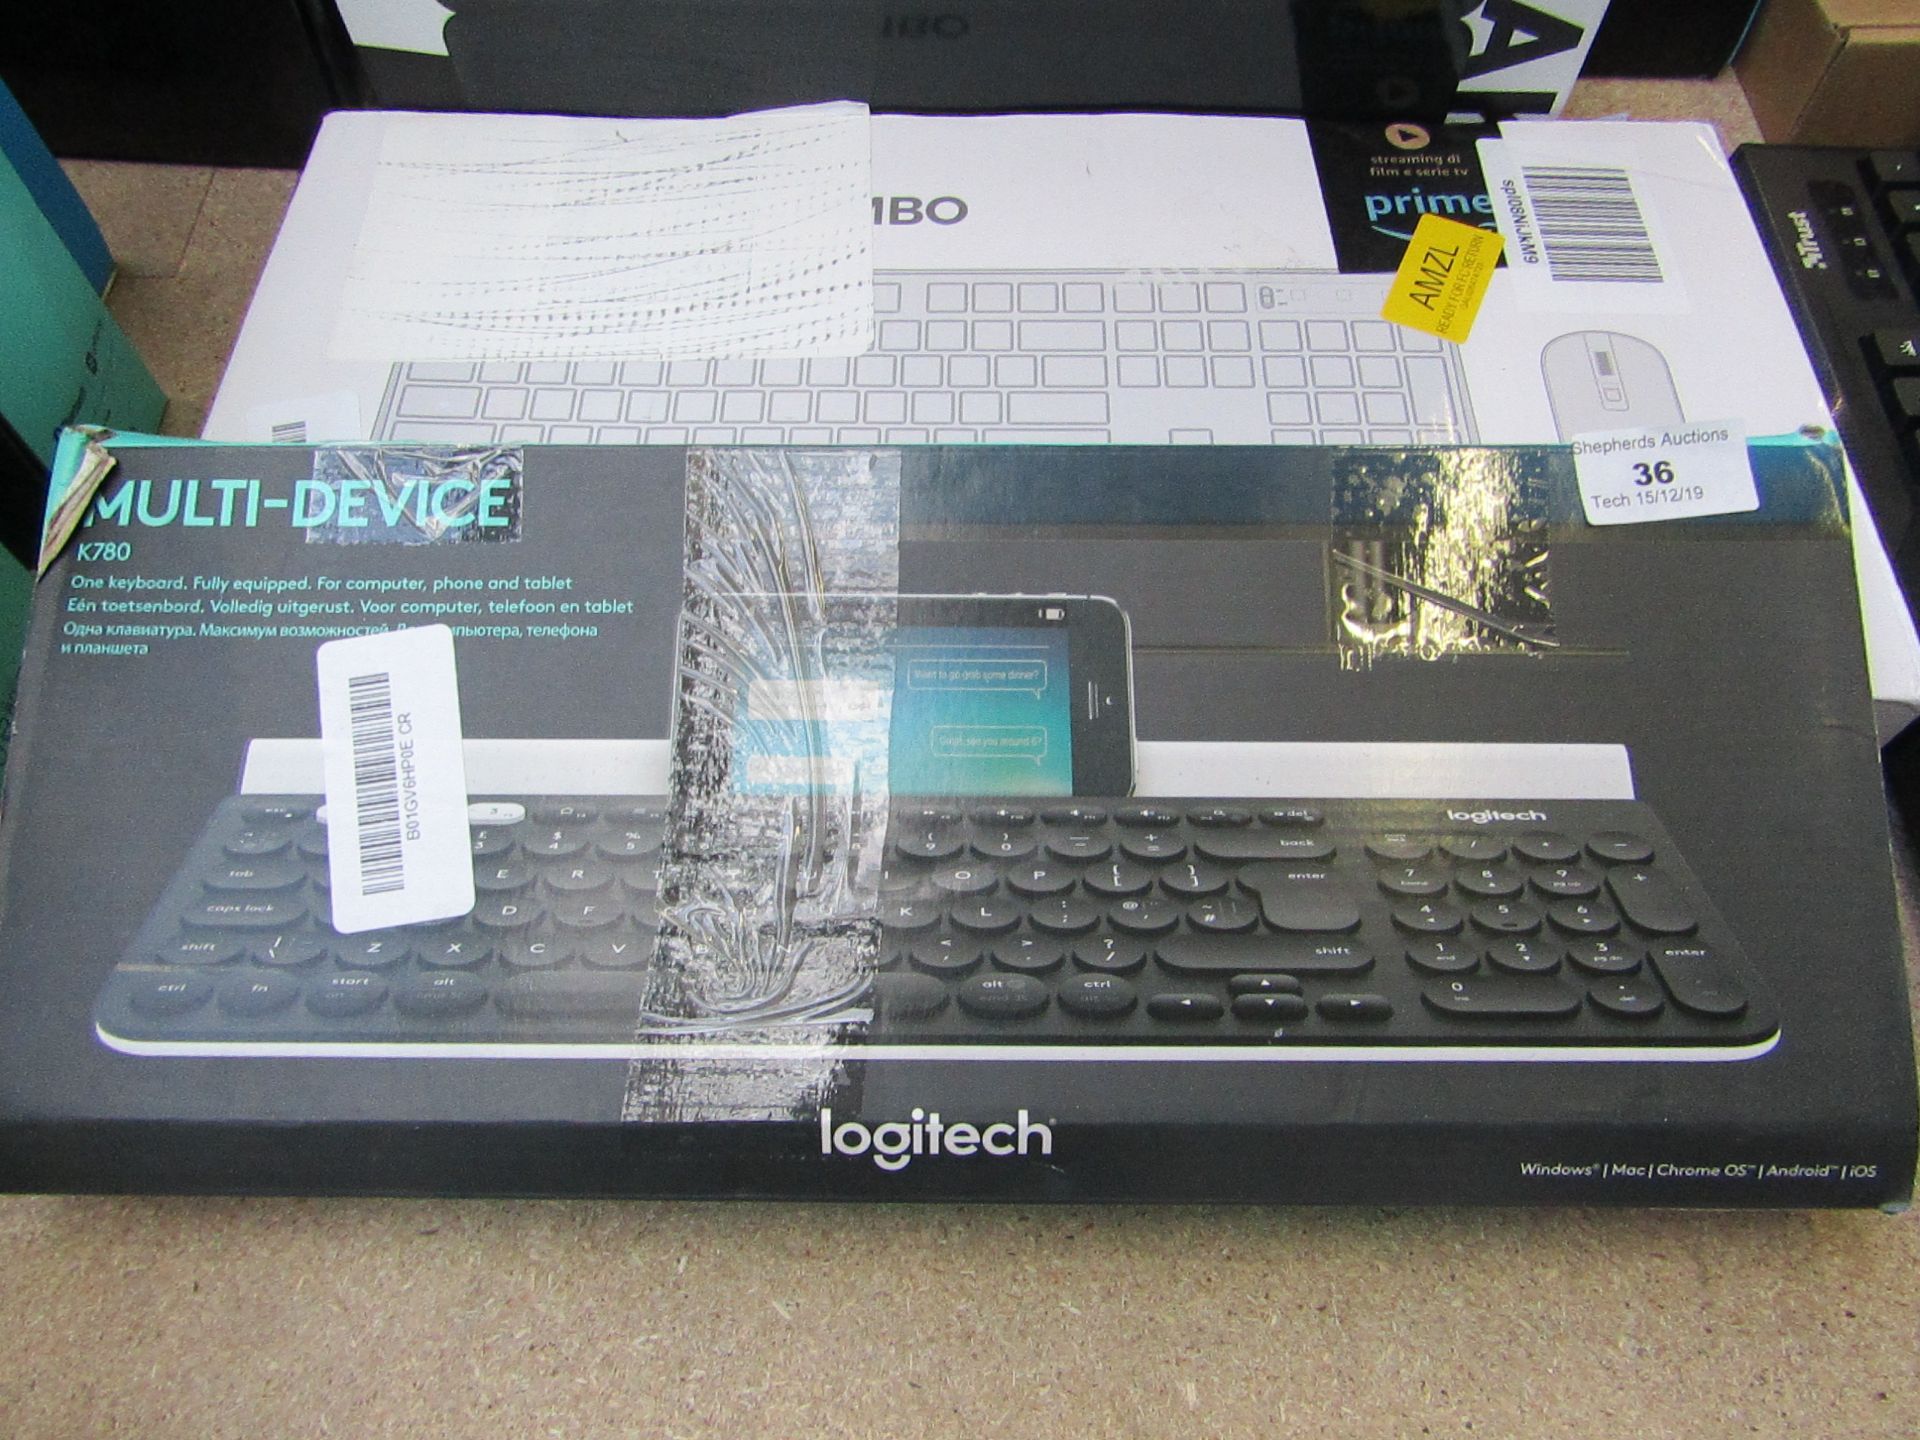 Logitech K780 multi-device keyboard, untested and boxed.